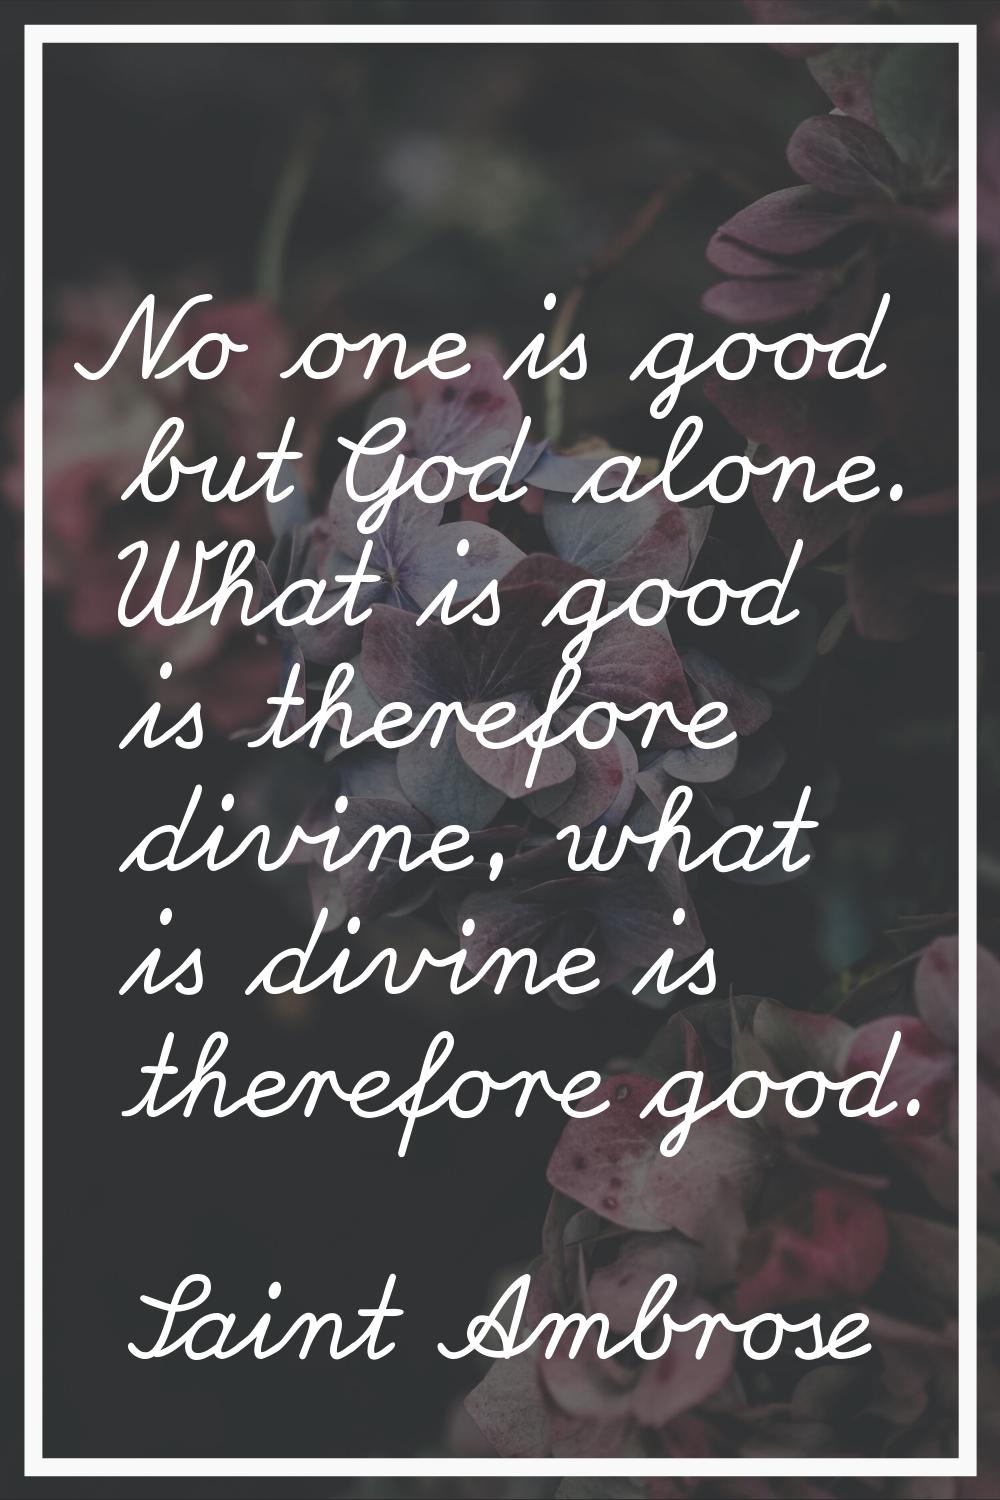 No one is good but God alone. What is good is therefore divine, what is divine is therefore good.